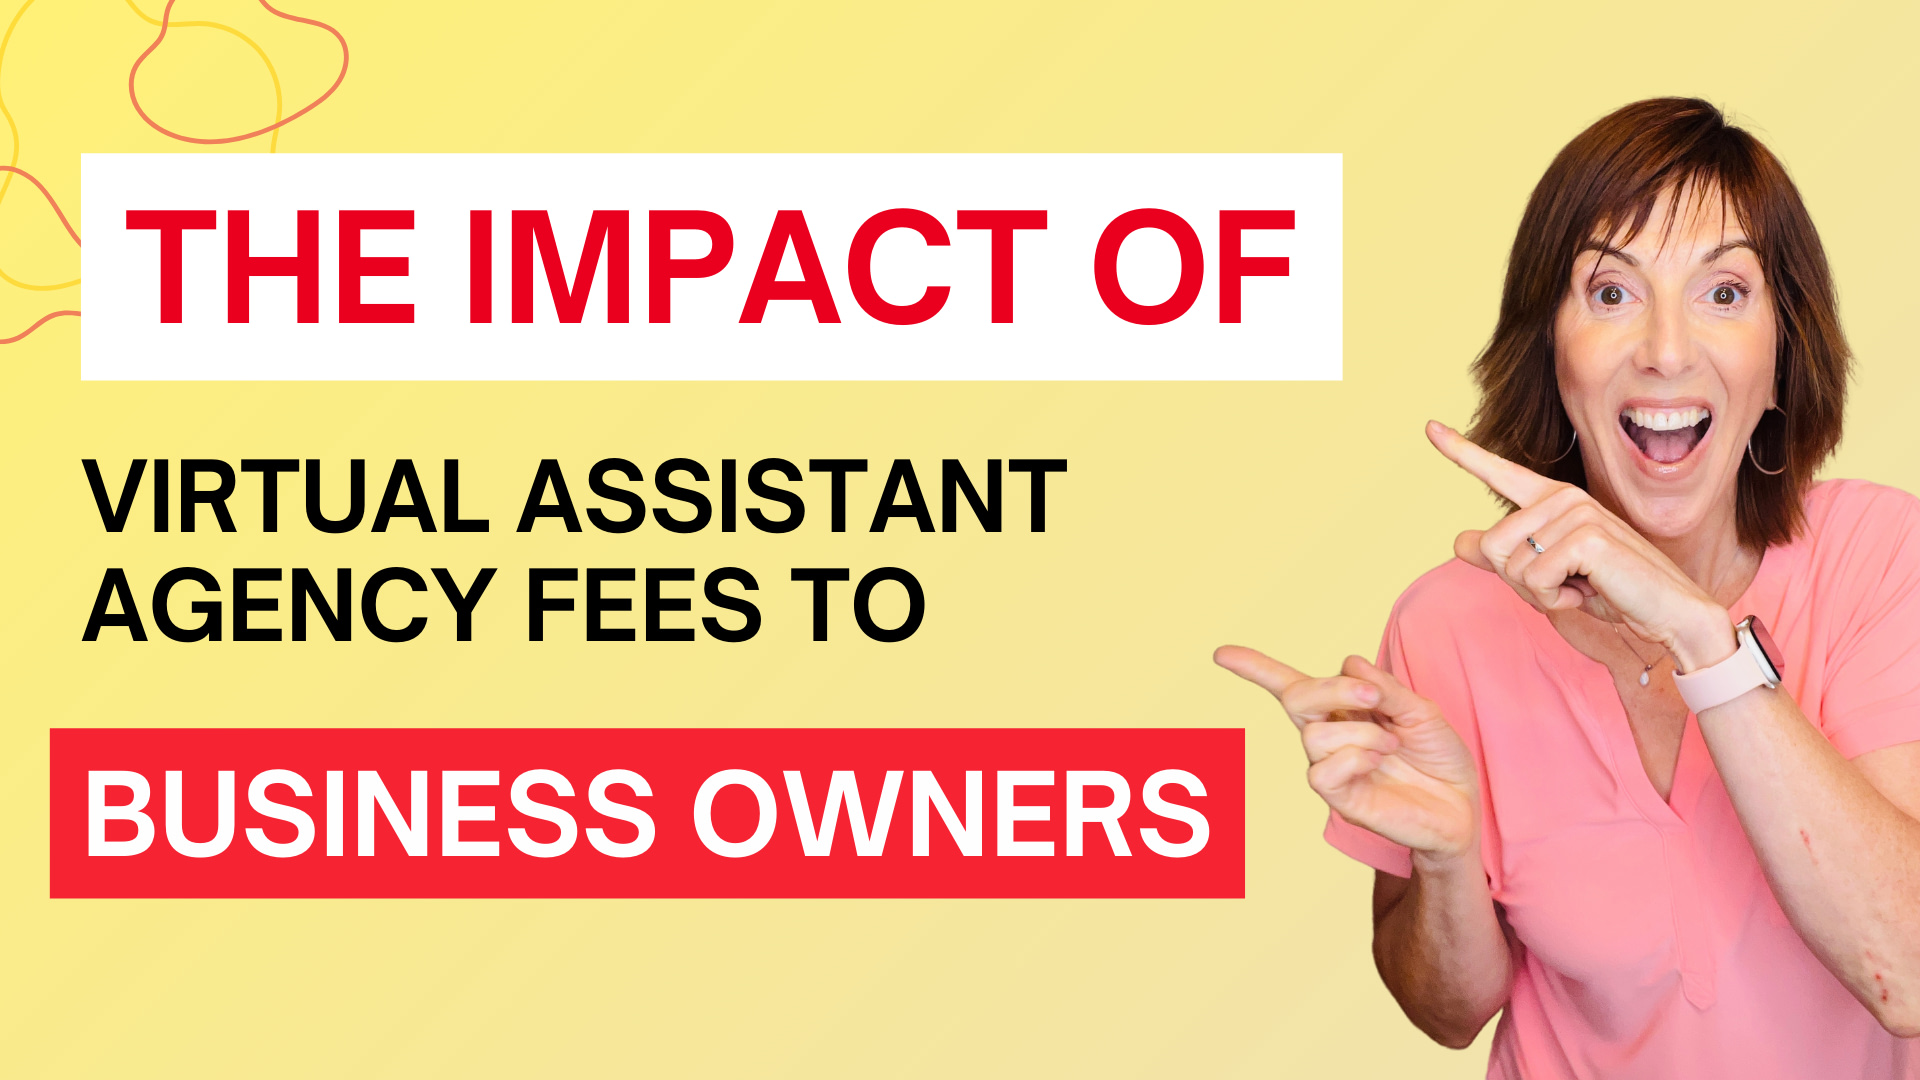 Virtual Assistant Agency Fees’ Impact To Business Owners